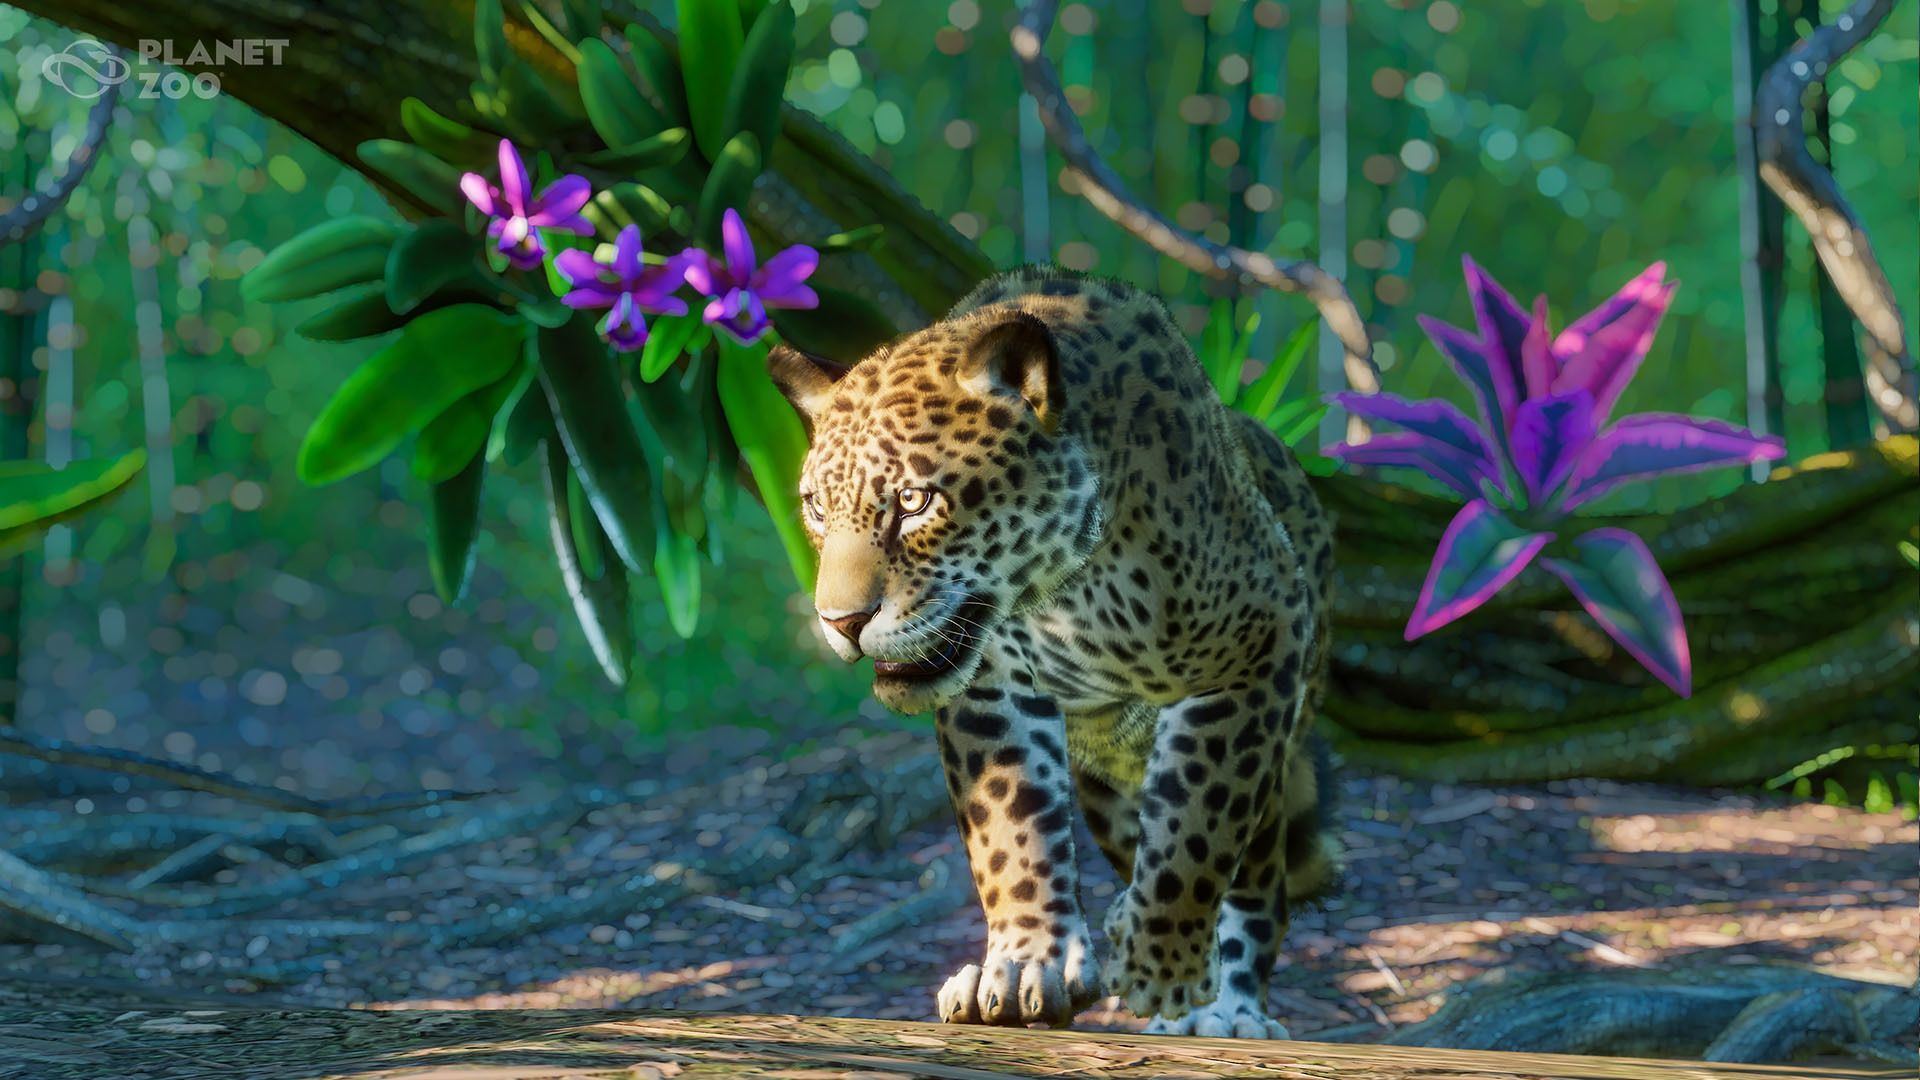 Planet Zoo Zoo: South America Pack coming 7 April, 2020